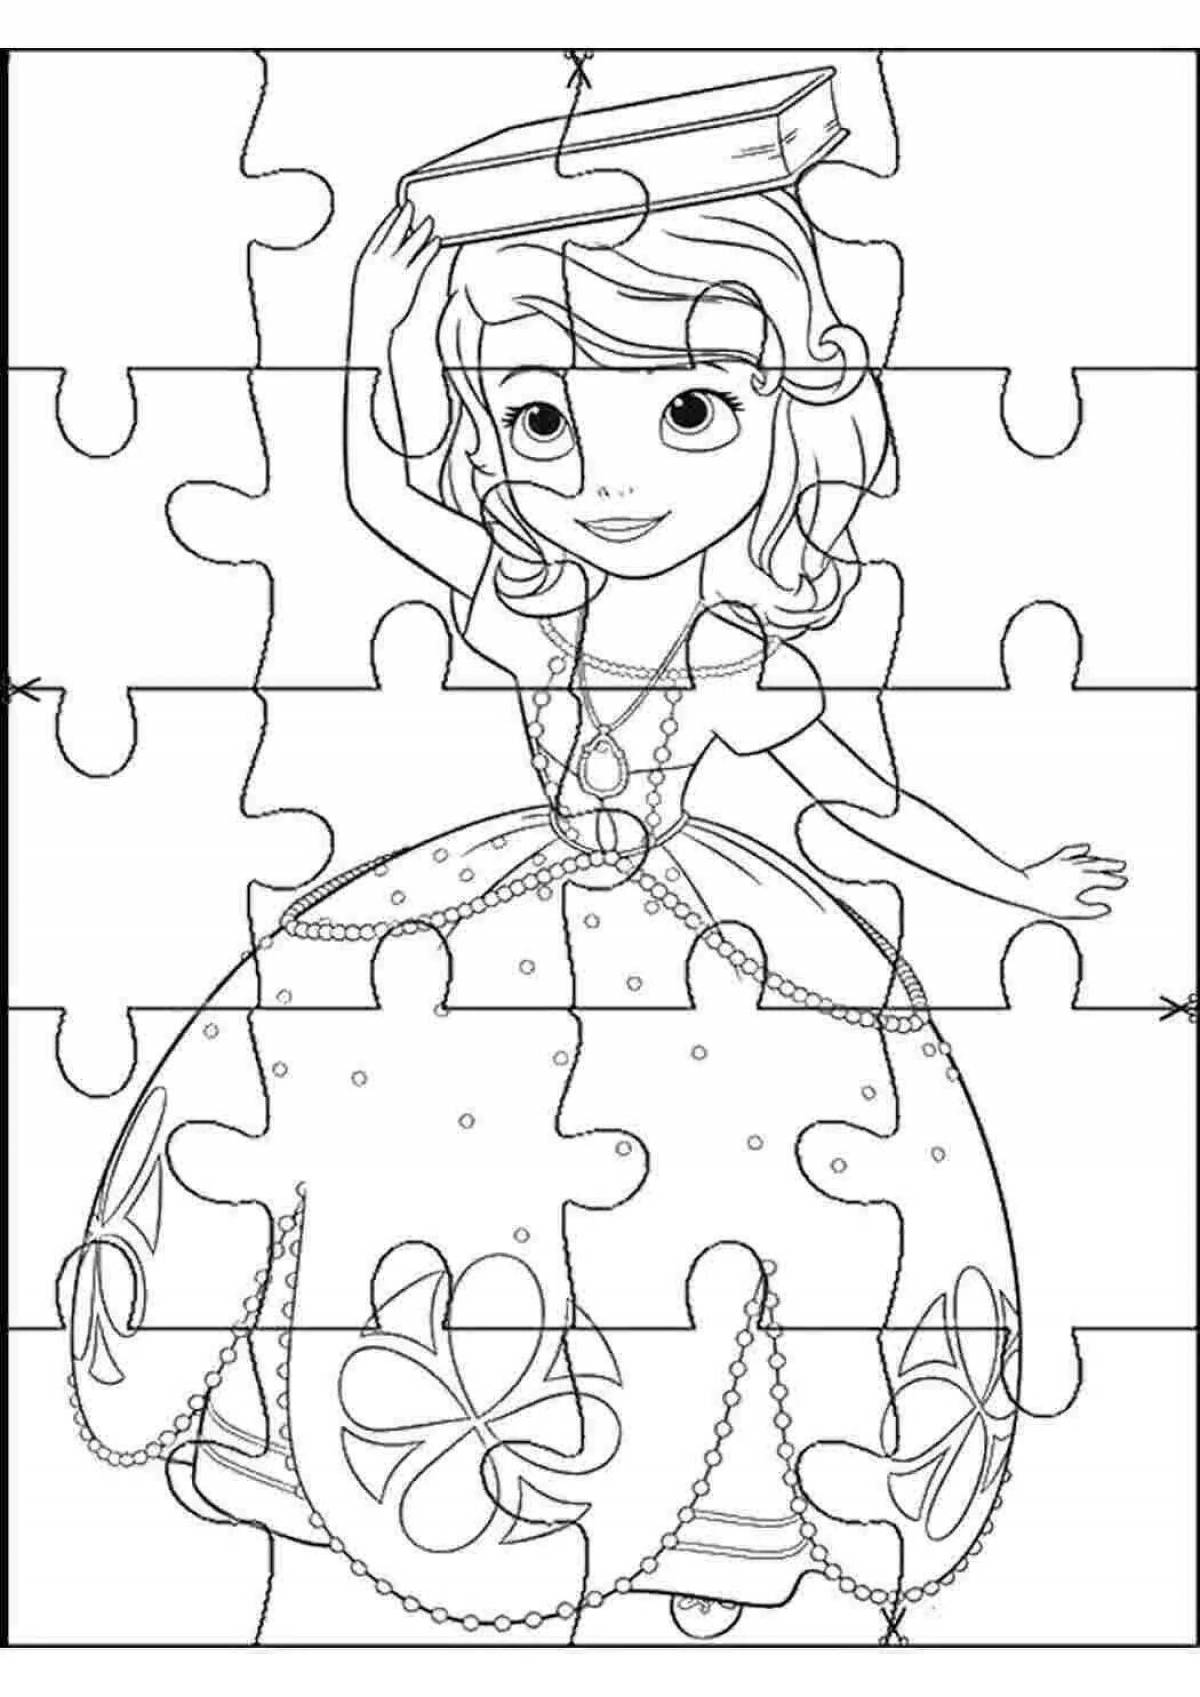 Inspirational puzzle coloring pages